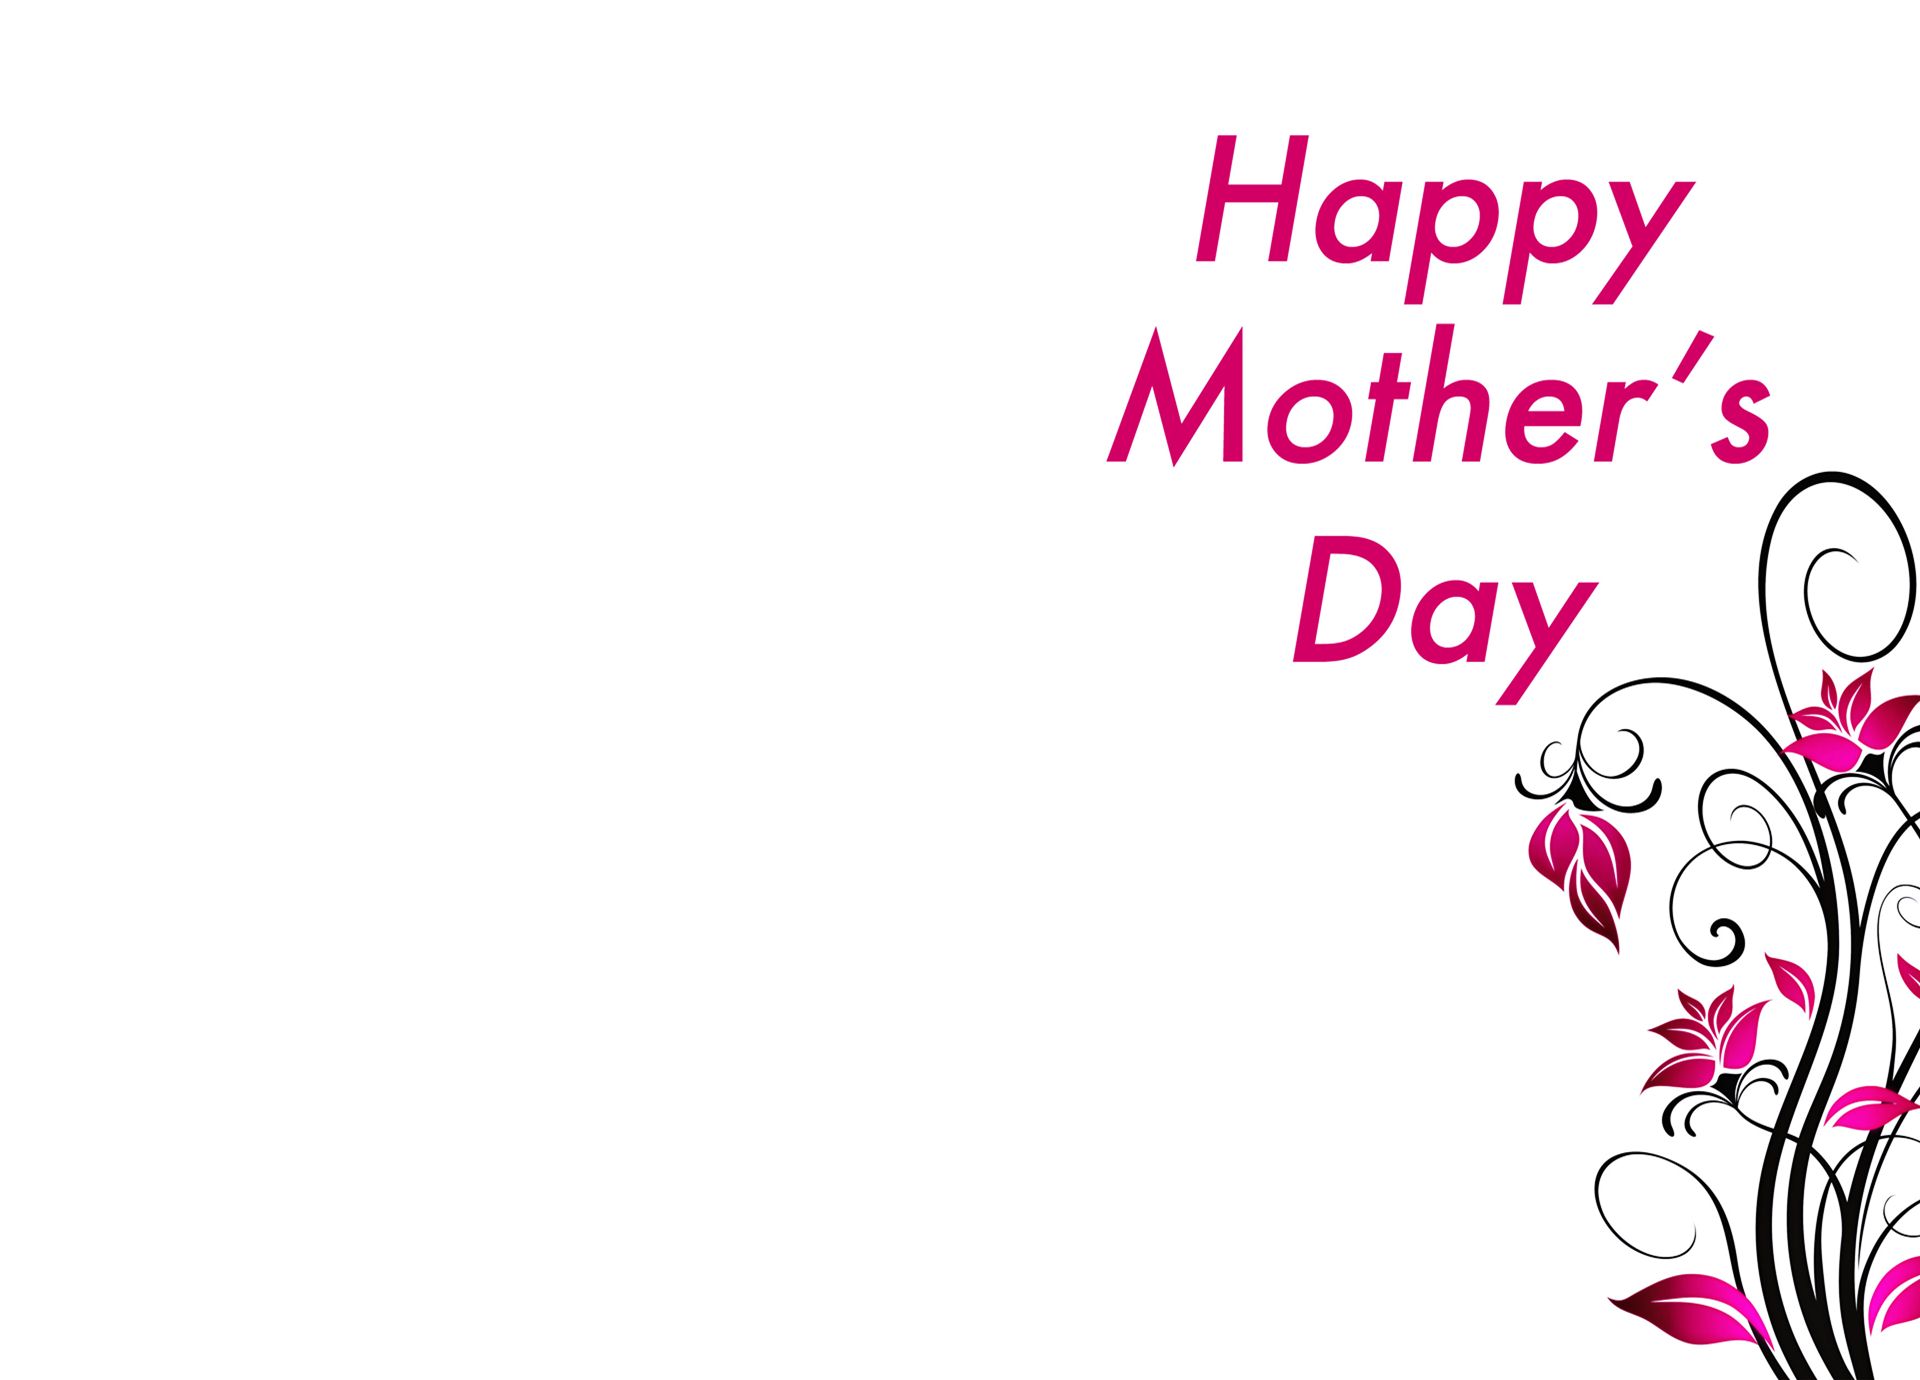 Mothers Day Wallpapers - Happy Mothers Day Blank Card , HD Wallpaper & Backgrounds